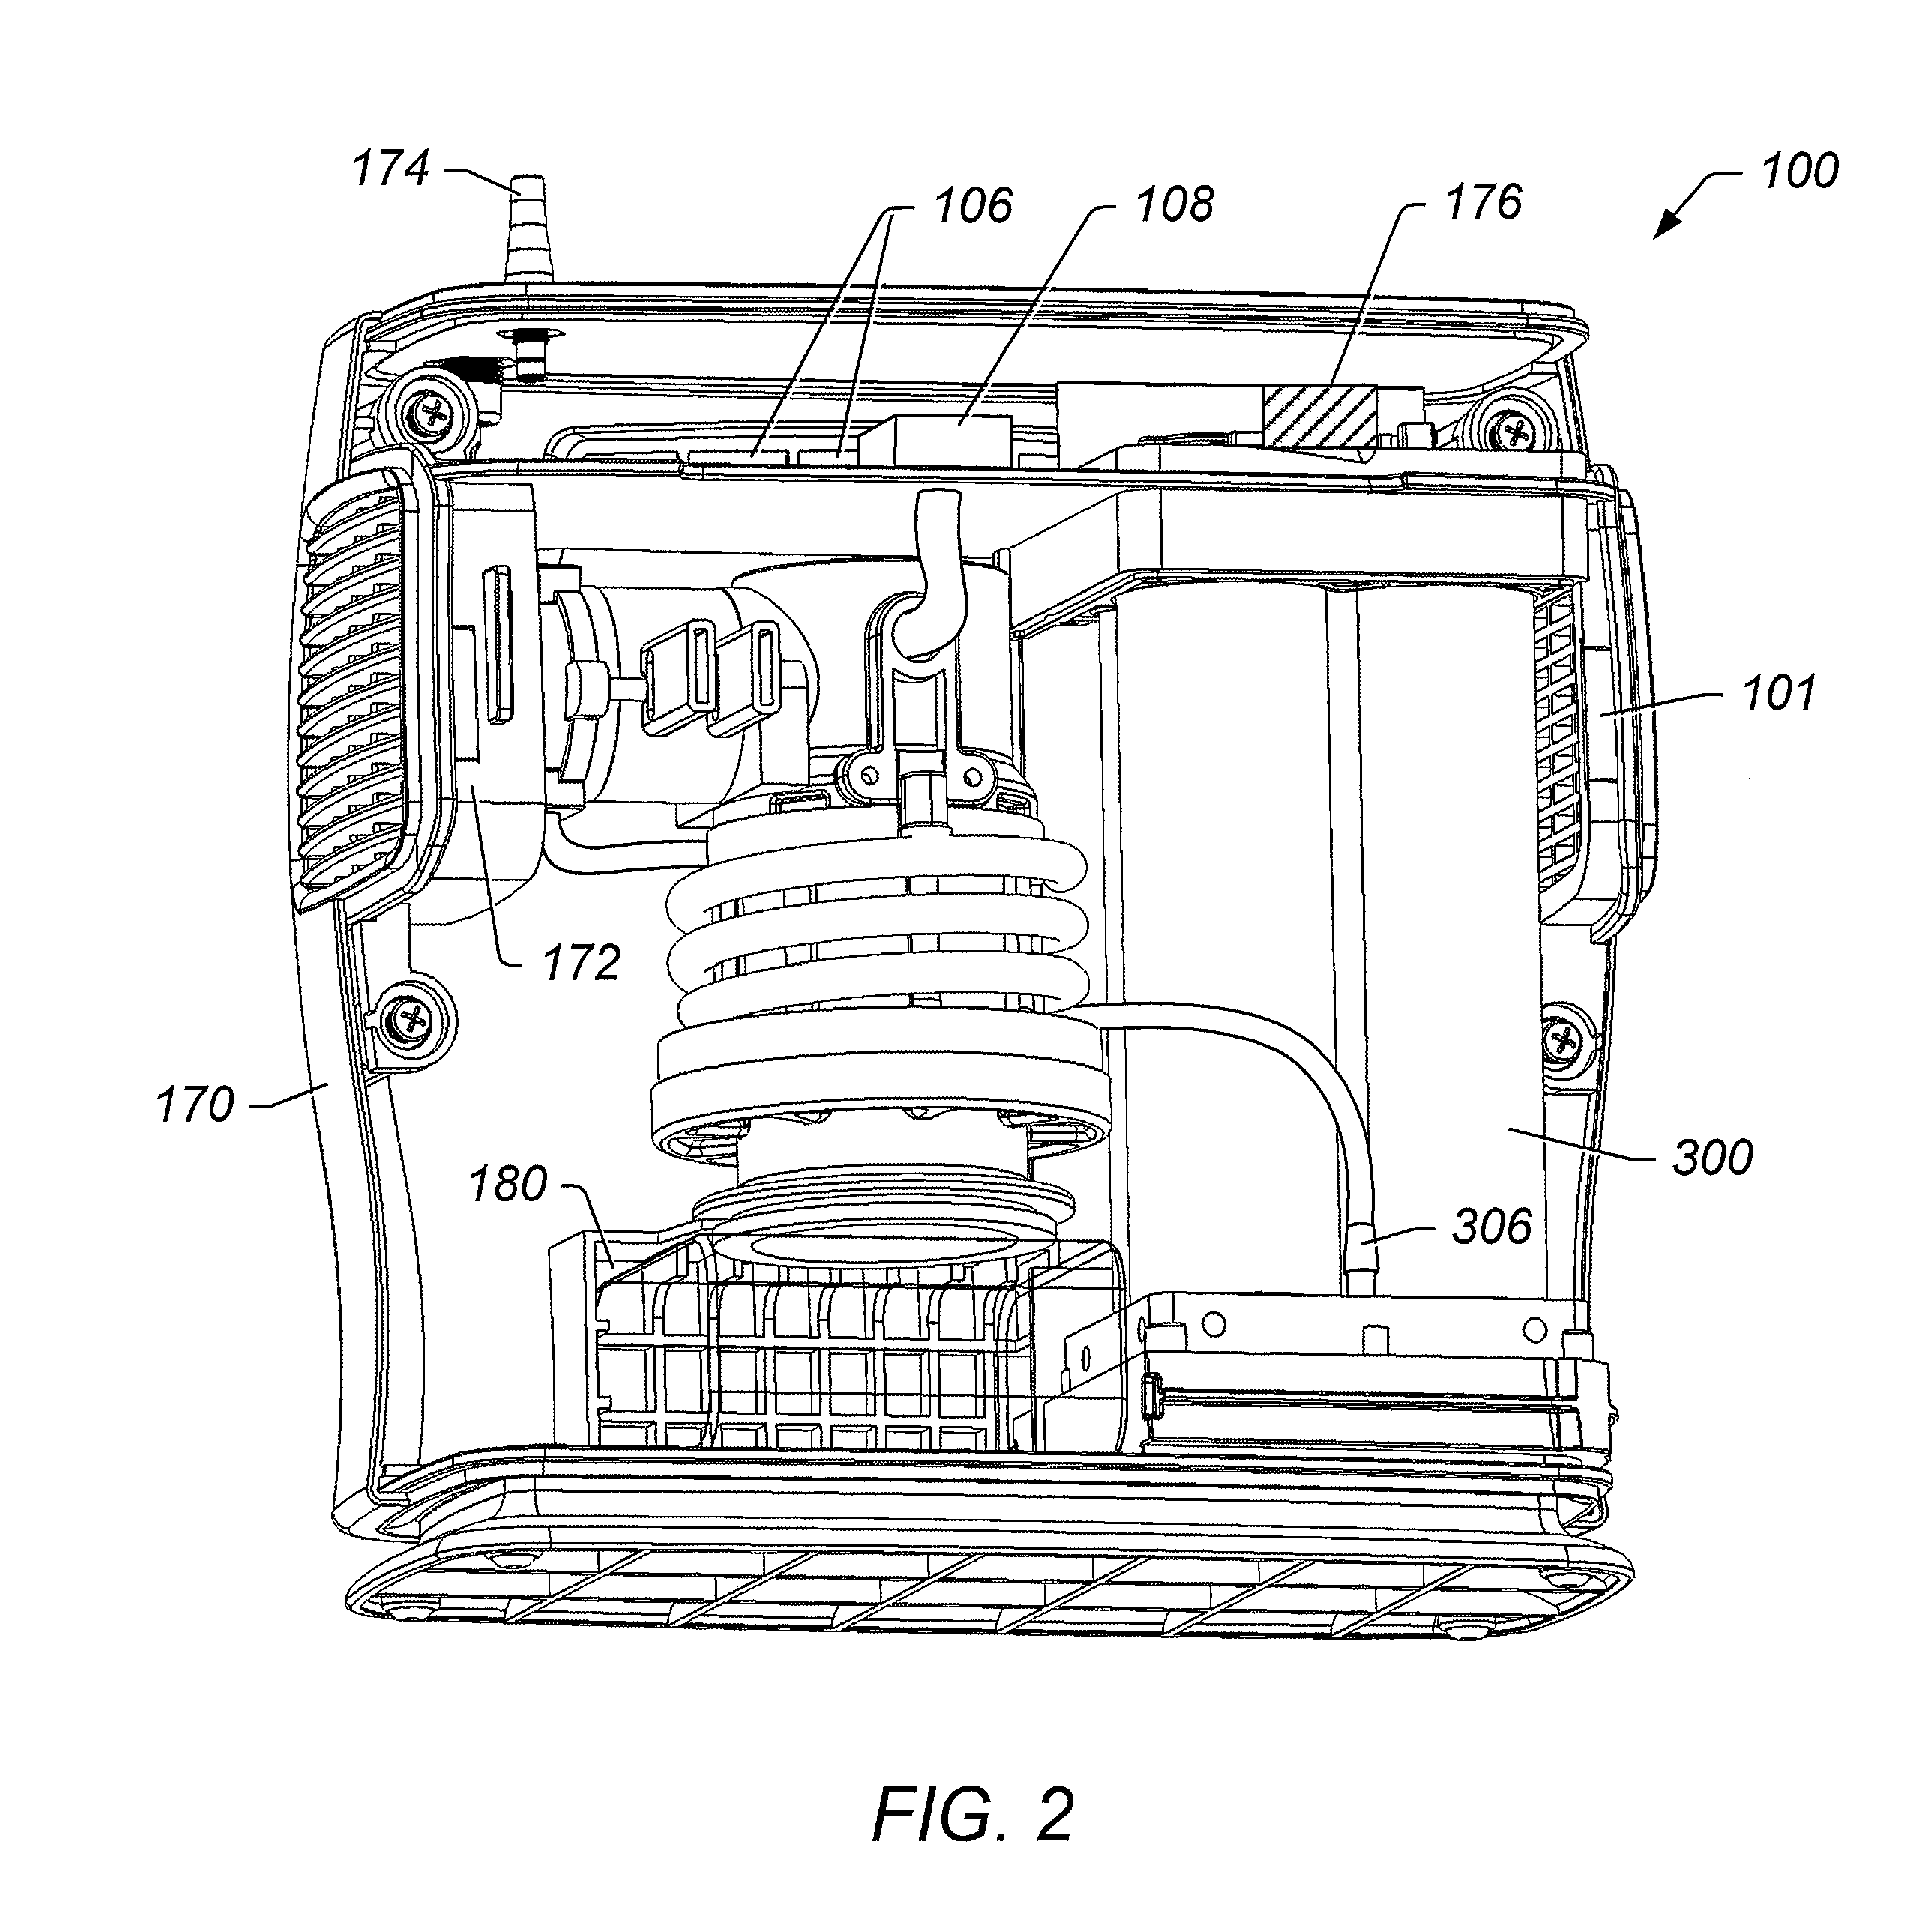 Oxygen concentrator system and methods for oral delivery of oxygen enriched gas